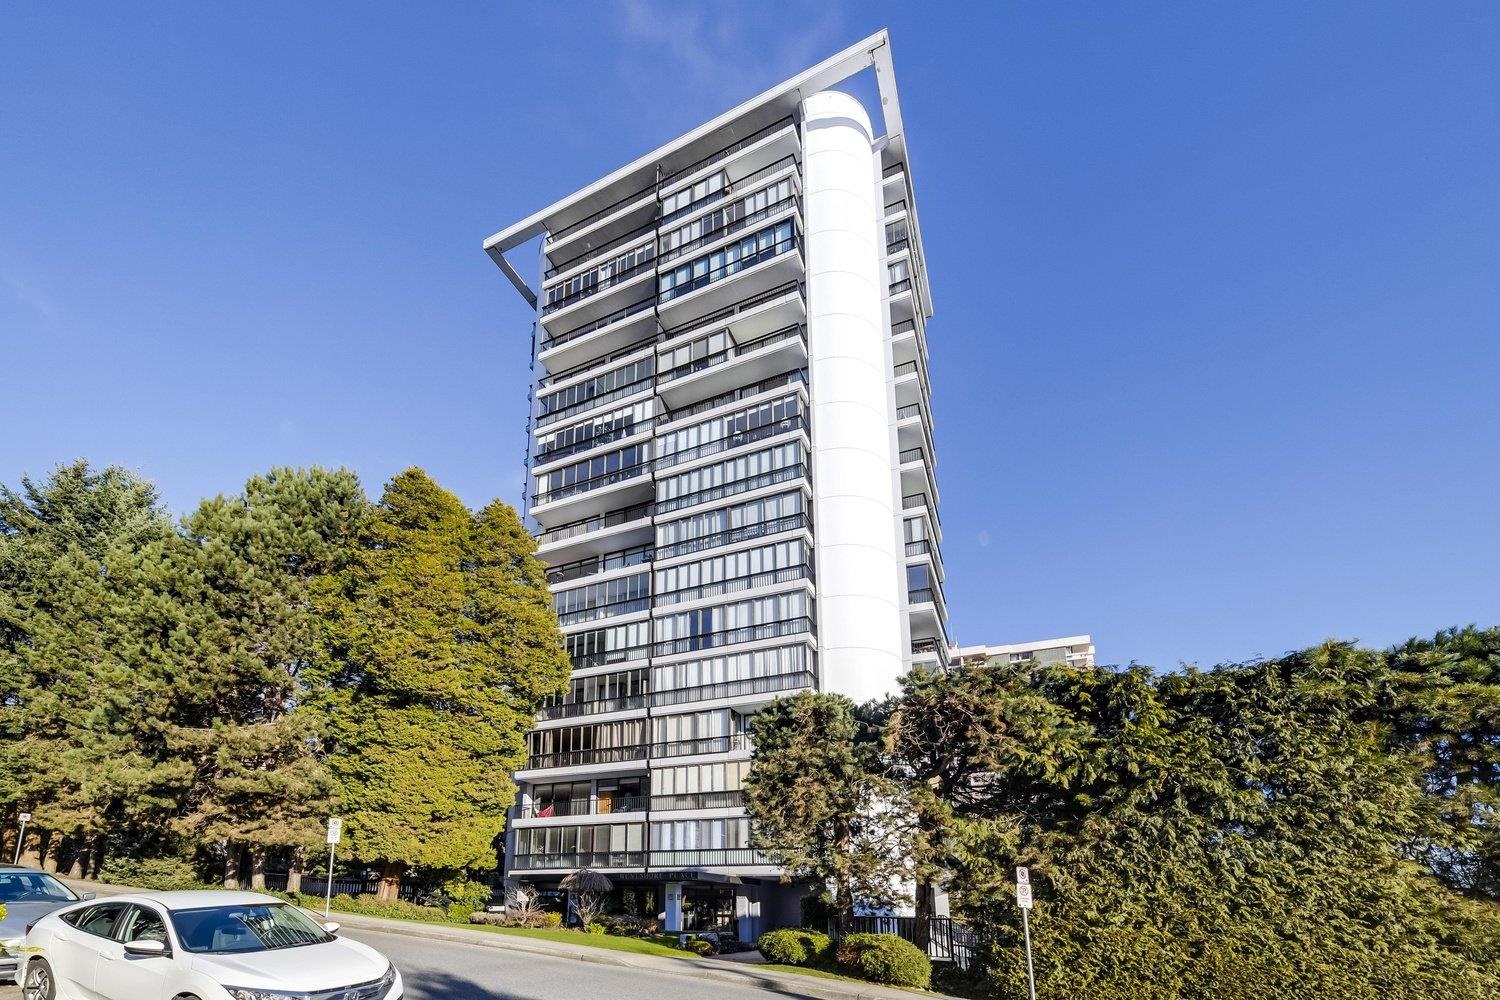 Ambleside Apartment/Condo for sale:  2 bedroom 1,000 sq.ft. (Listed 5200-03-29)